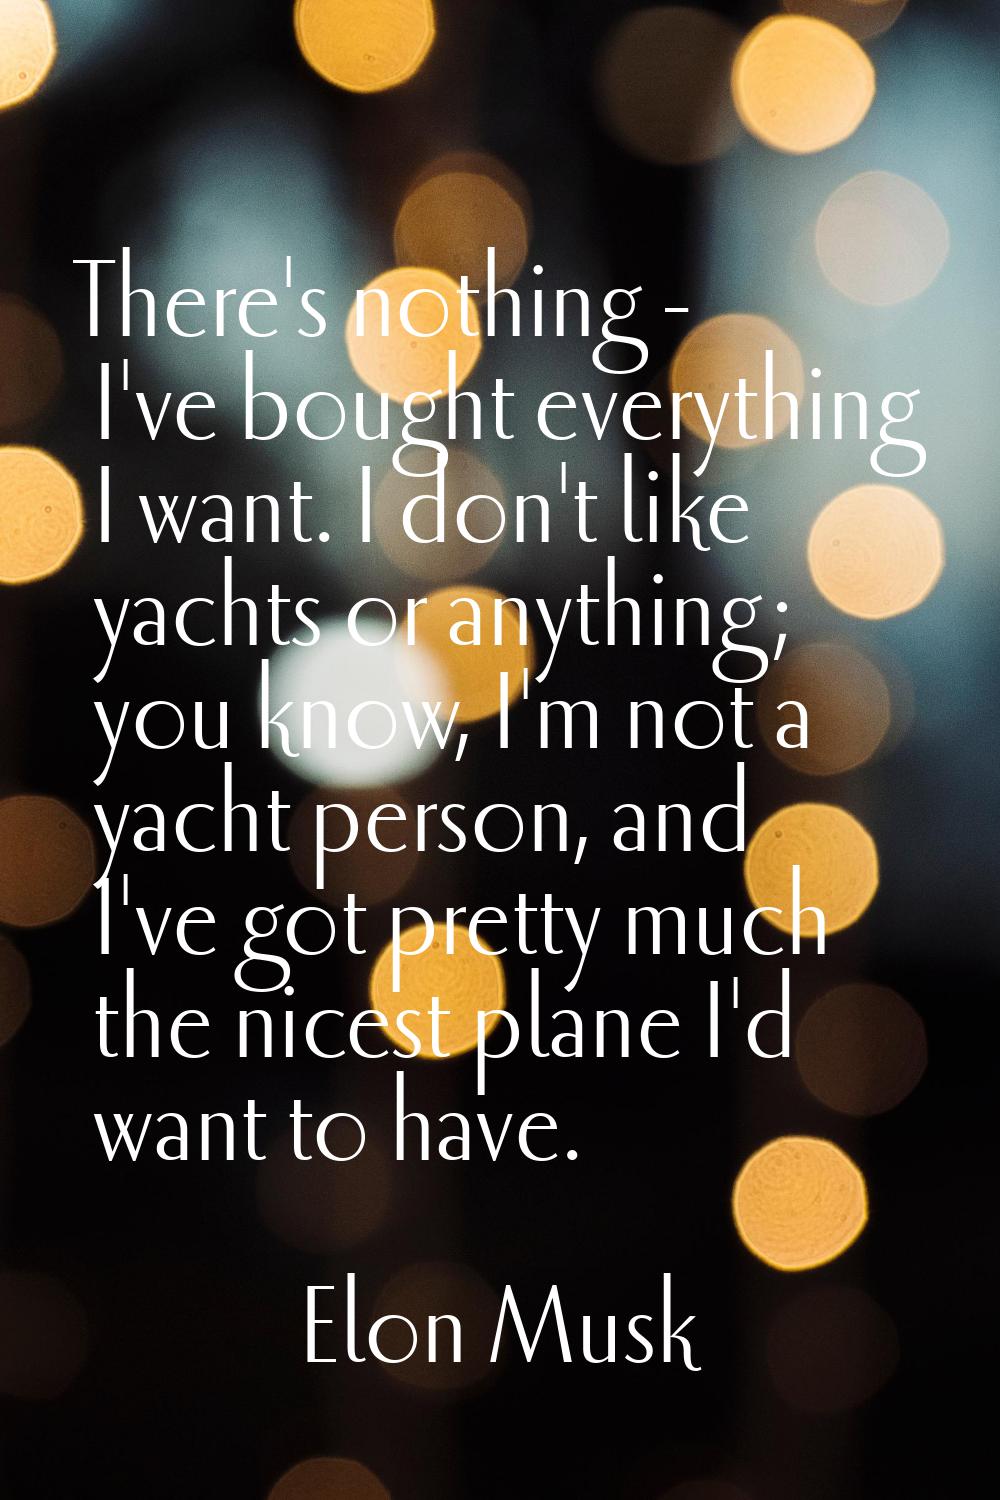 There's nothing - I've bought everything I want. I don't like yachts or anything; you know, I'm not